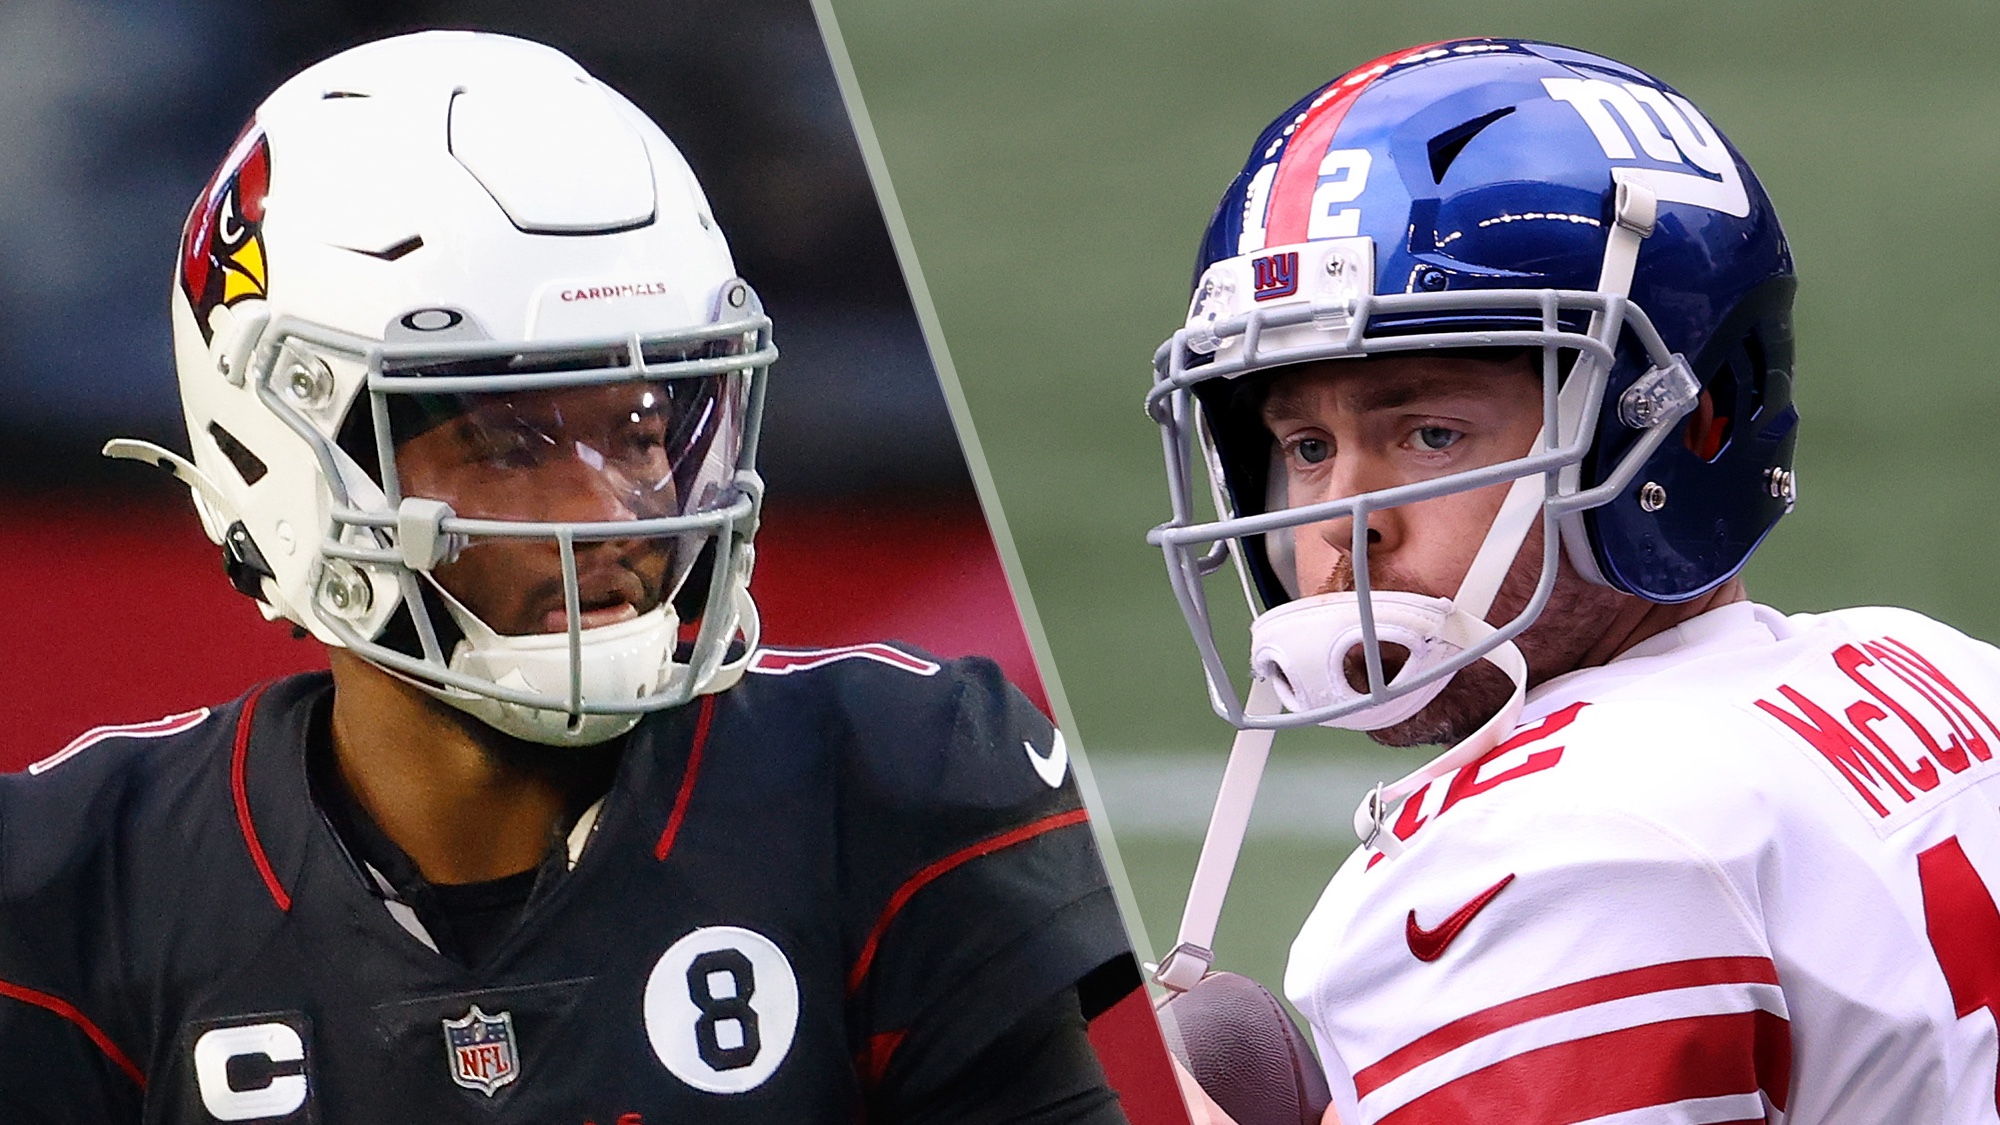 Cardinals vs Giants live stream: How to watch NFL game online now